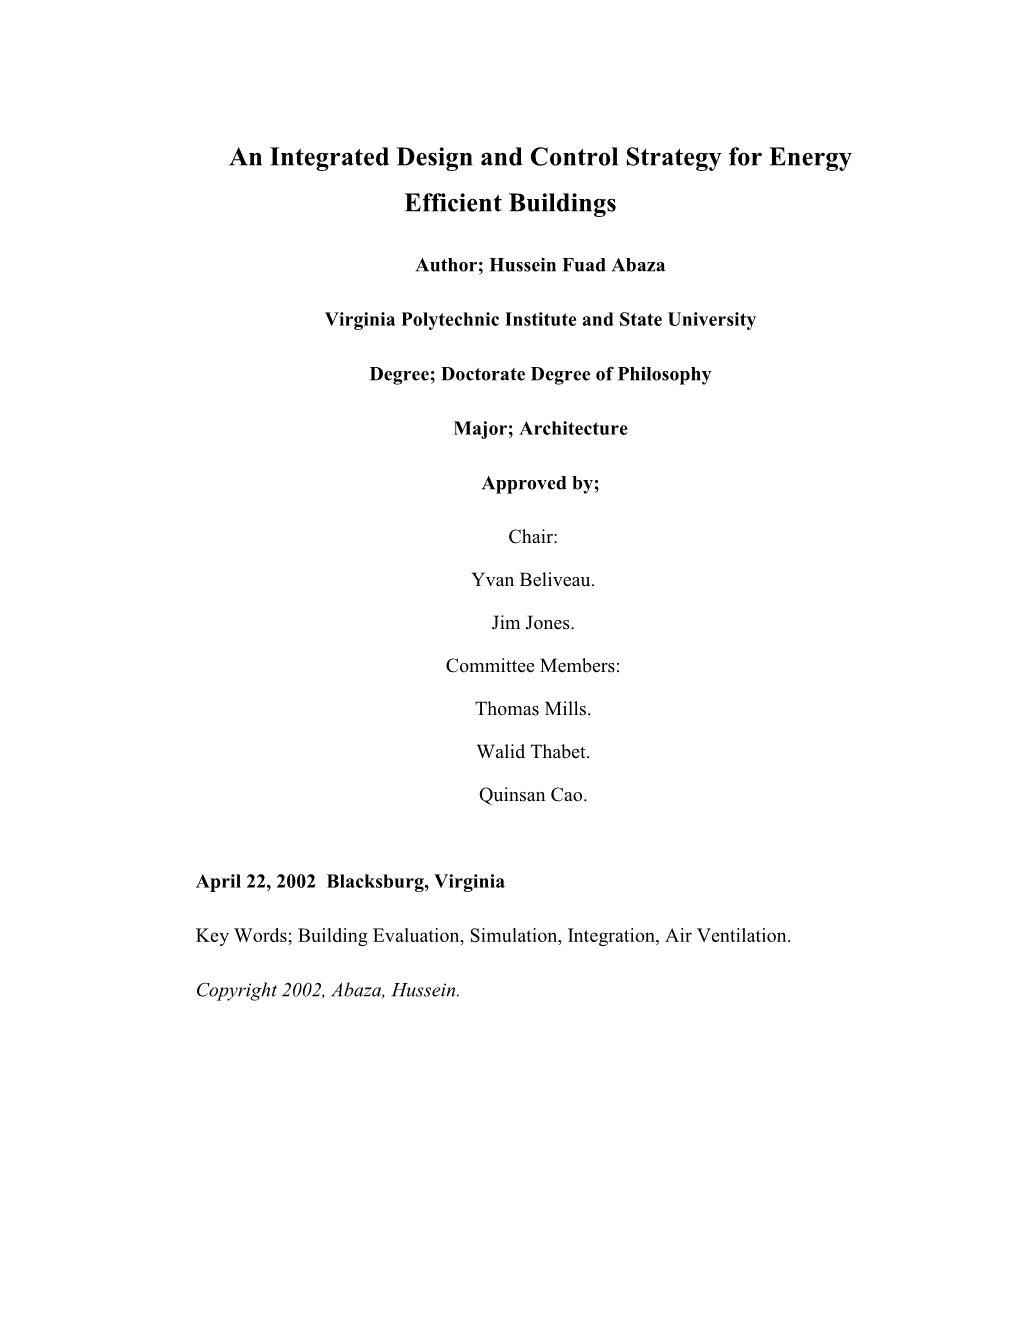 An Integrated Design and Control Strategy for Energy Efficient Buildings